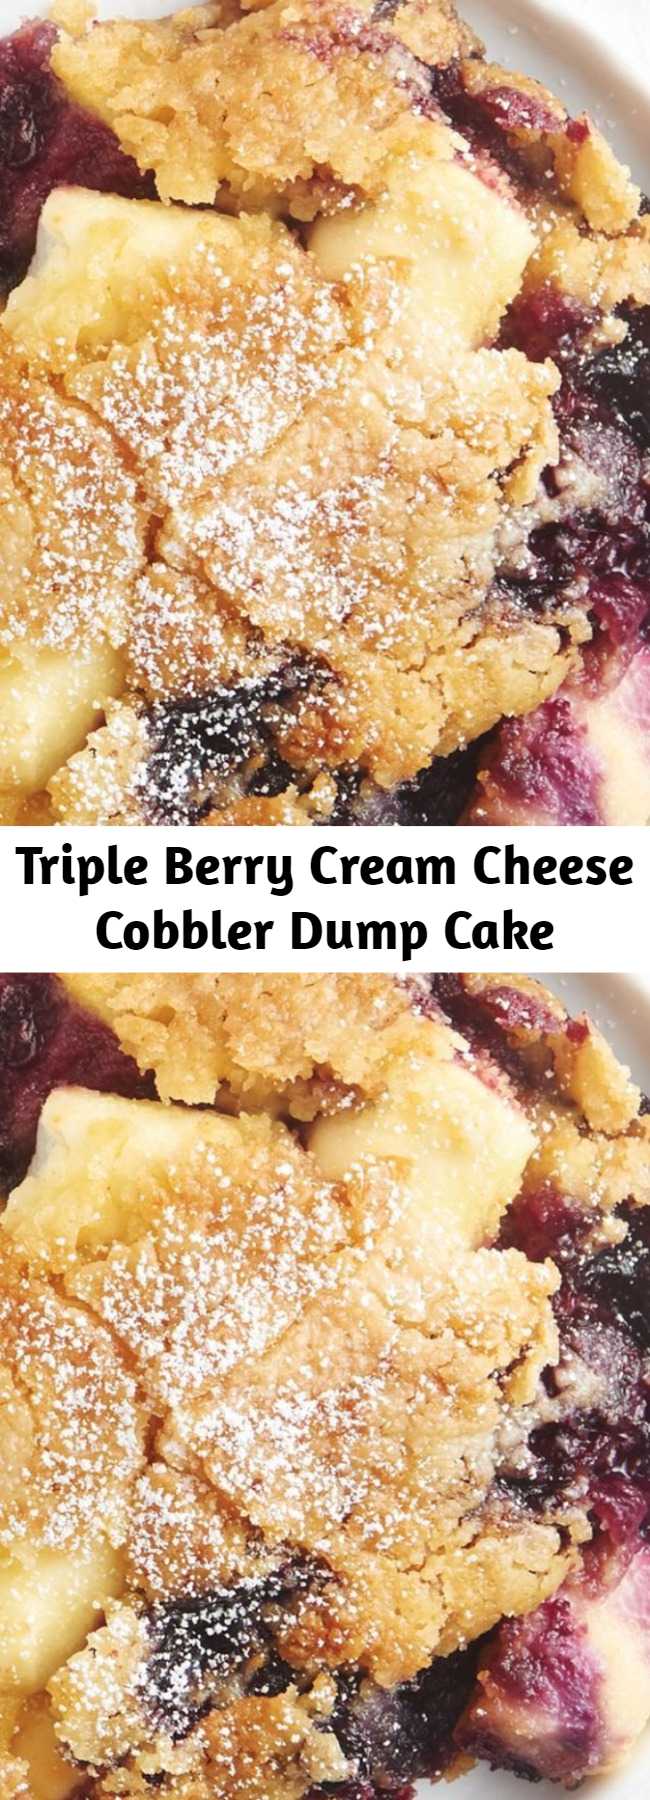 Triple Berry Cream Cheese Cobbler Dump Cake - When a fresh berry cobbler meets an easy dump cake, the end result is pure magic. Raspberries, blueberries and blackberries get mixed with cream cheese and cake mix for an easy dessert that's no-fuss and totally delicious.